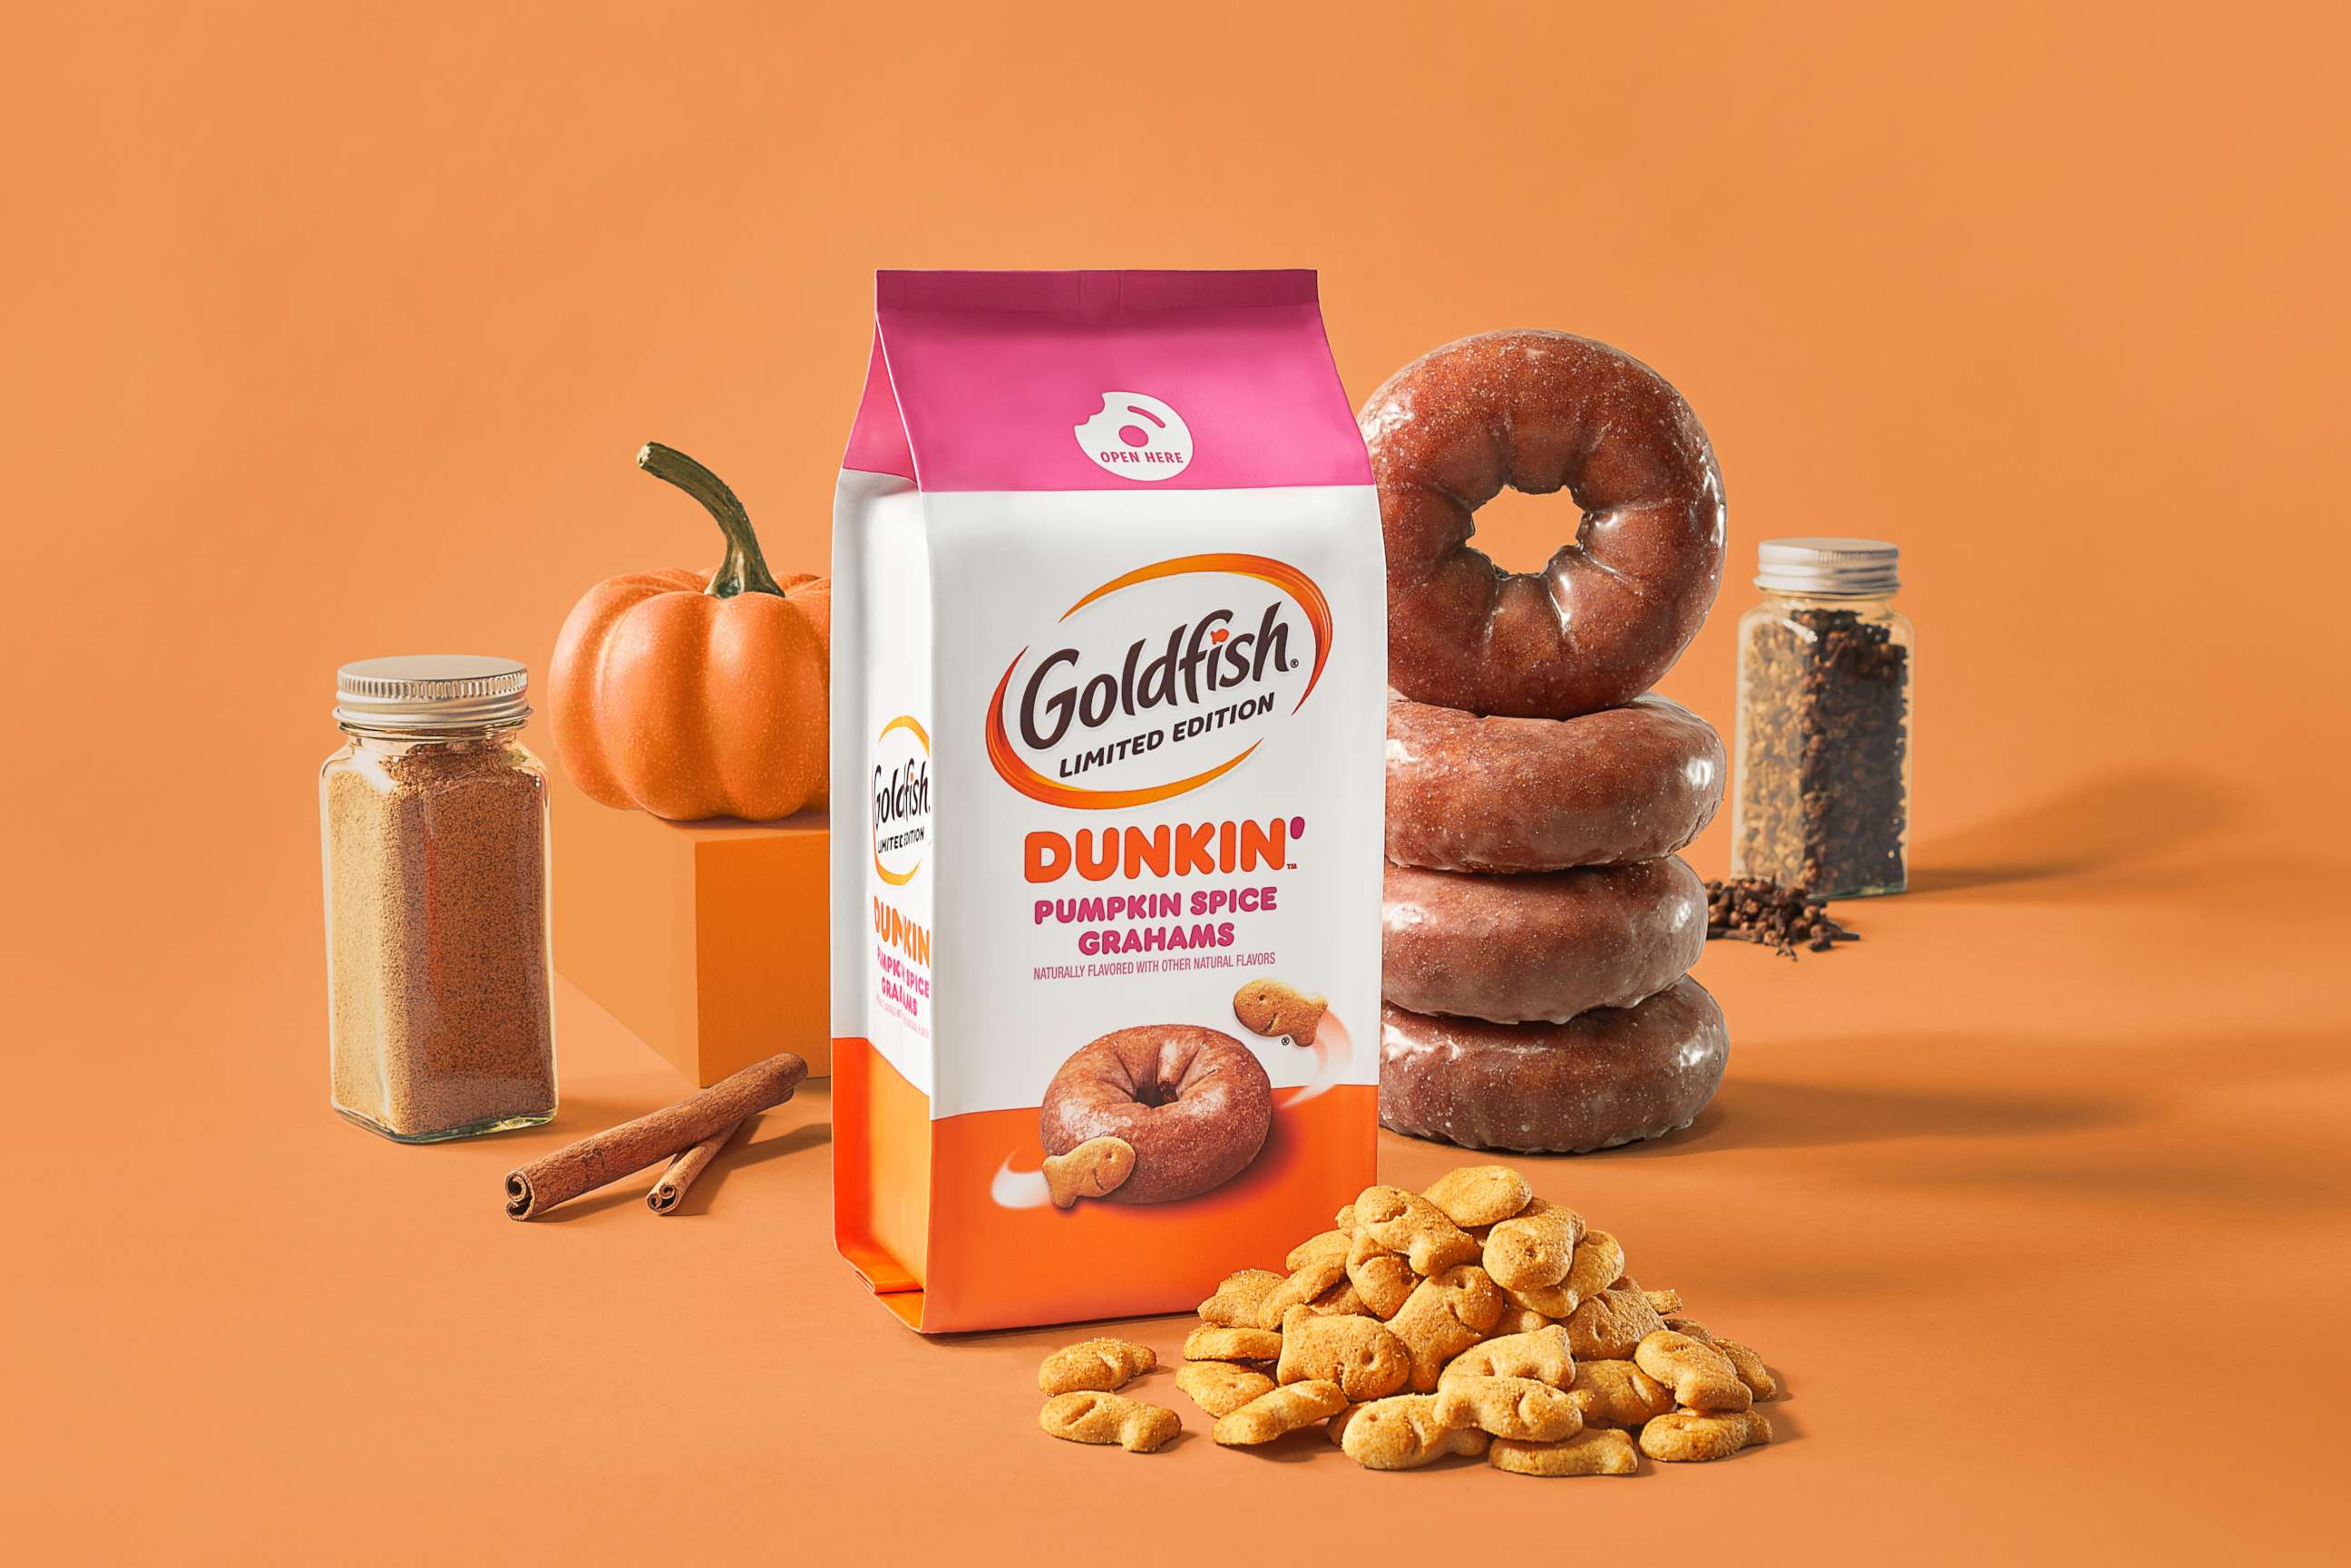 PHOTO: Goldfish teamed up with Dunkin' to create limited-edition pumpkin spice graham crackers.